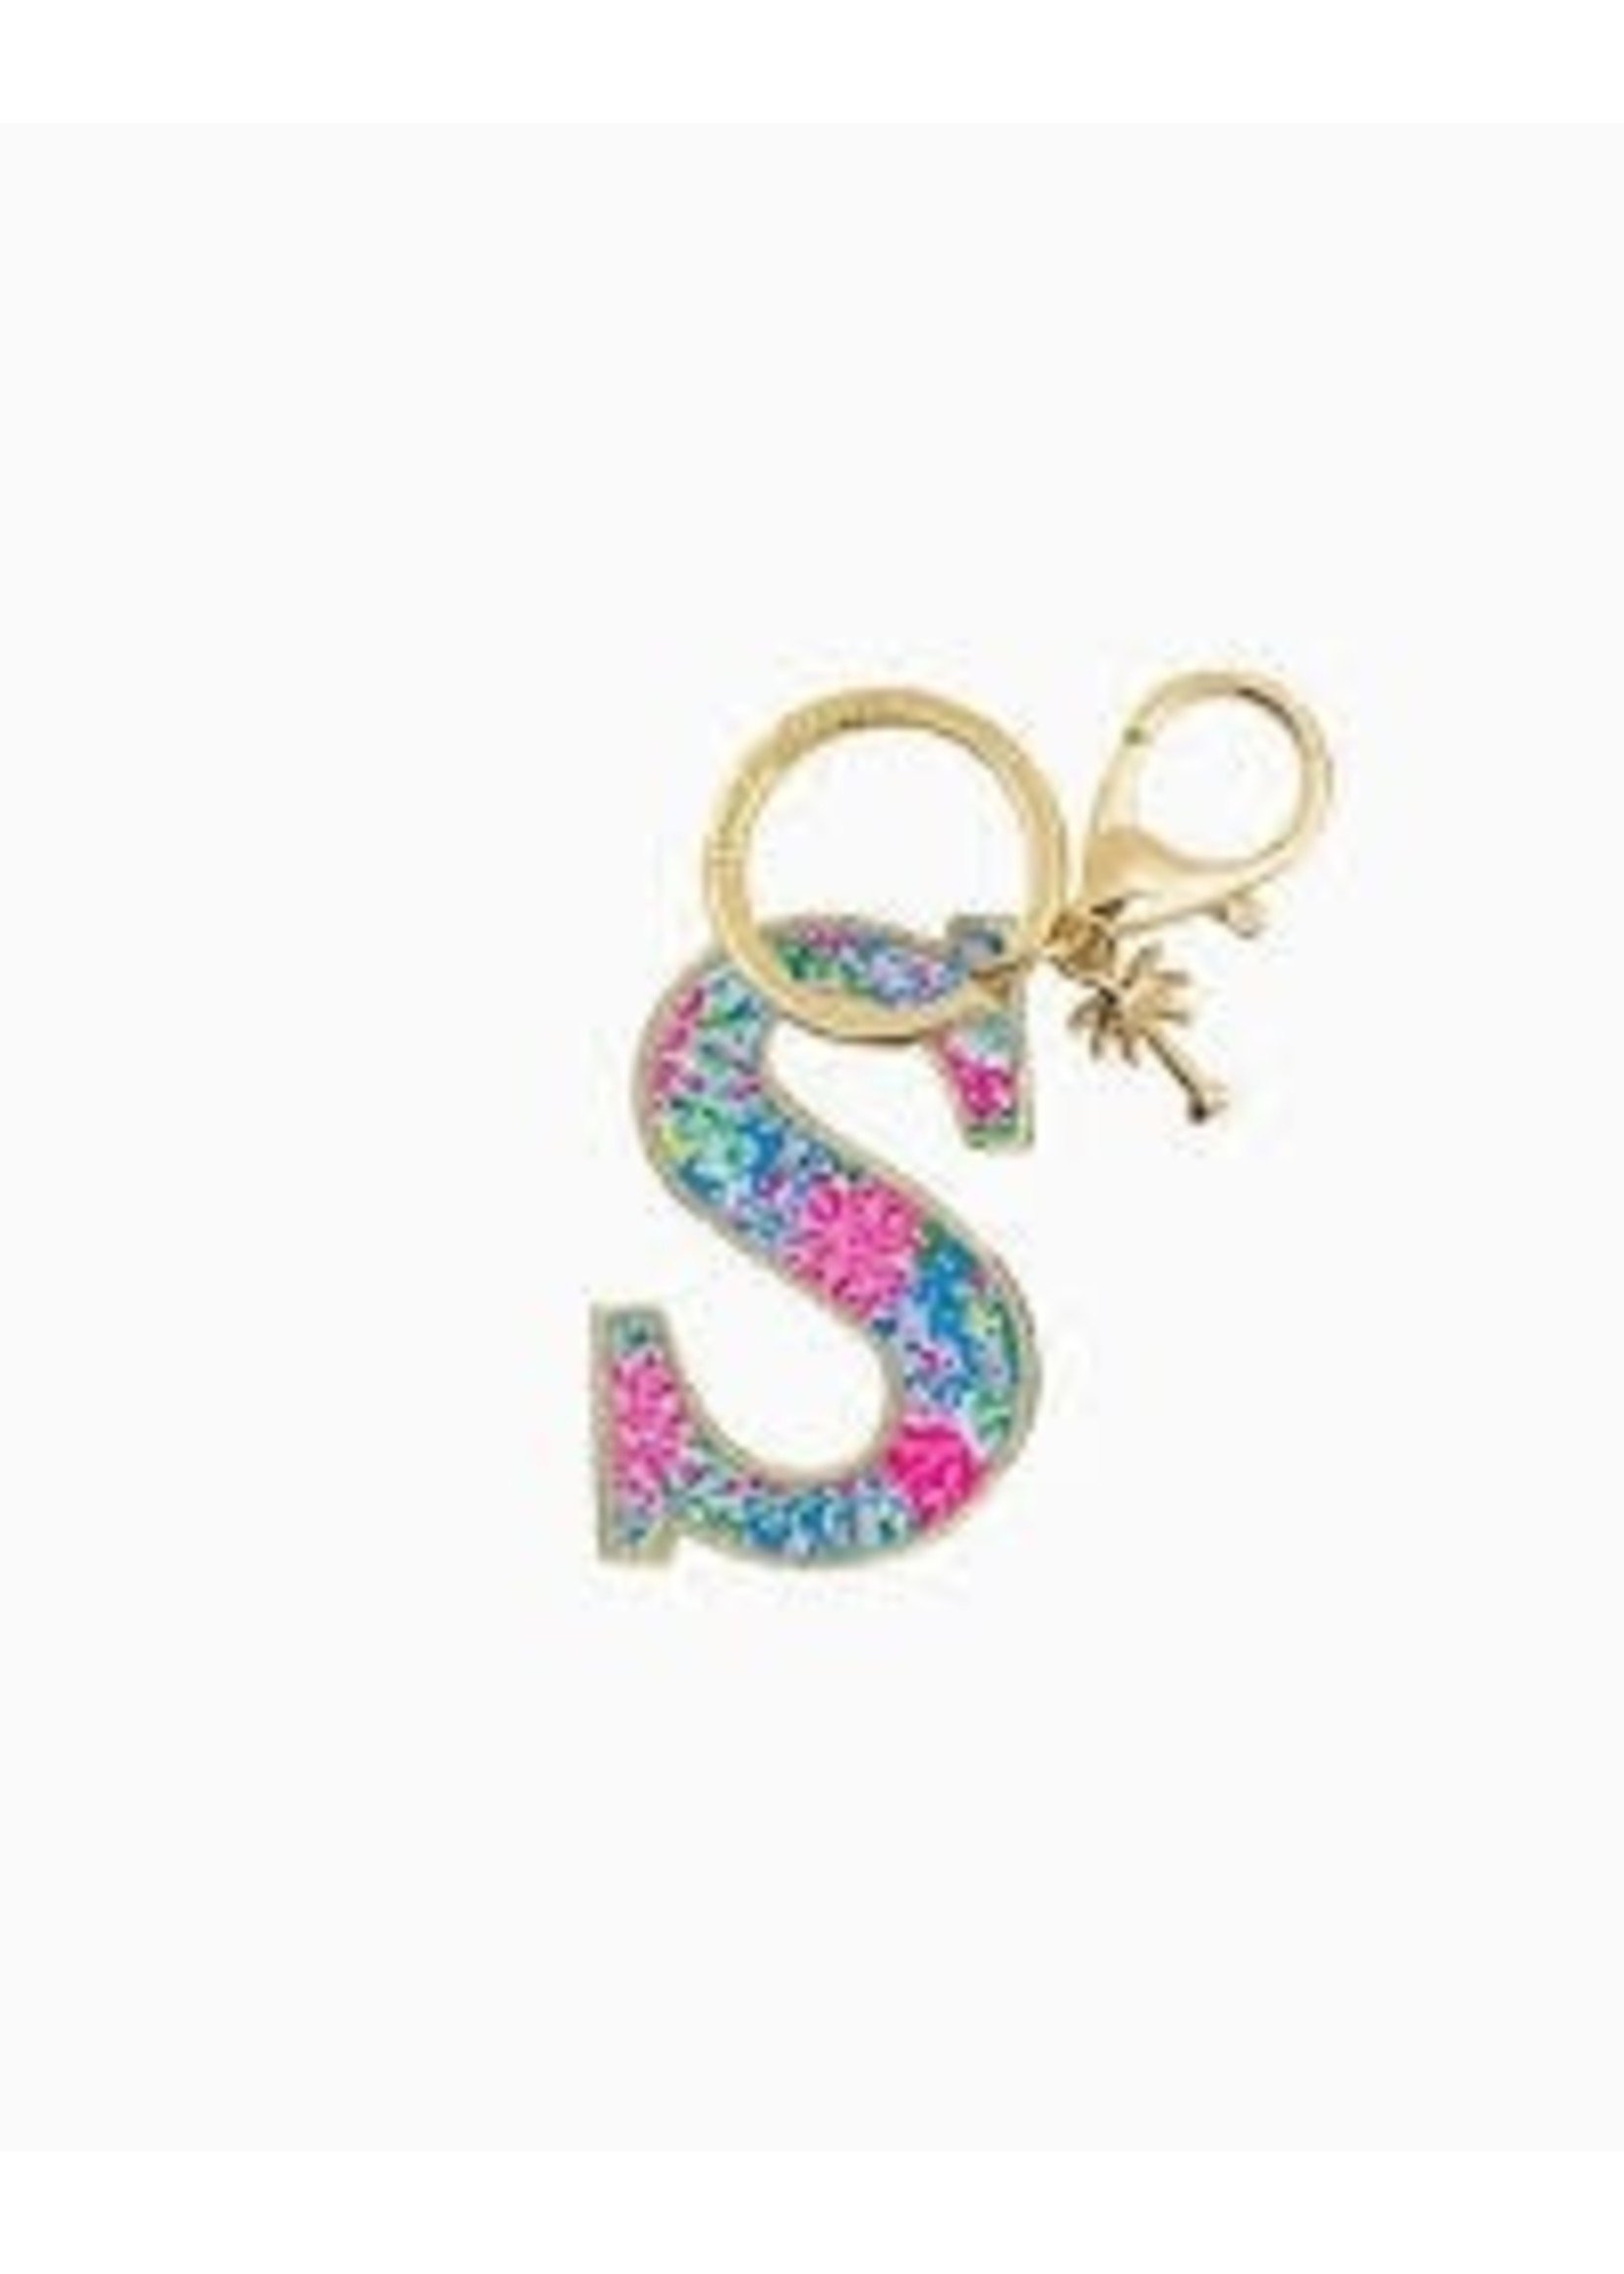 Lilly Pulitzer Initial Keychain S